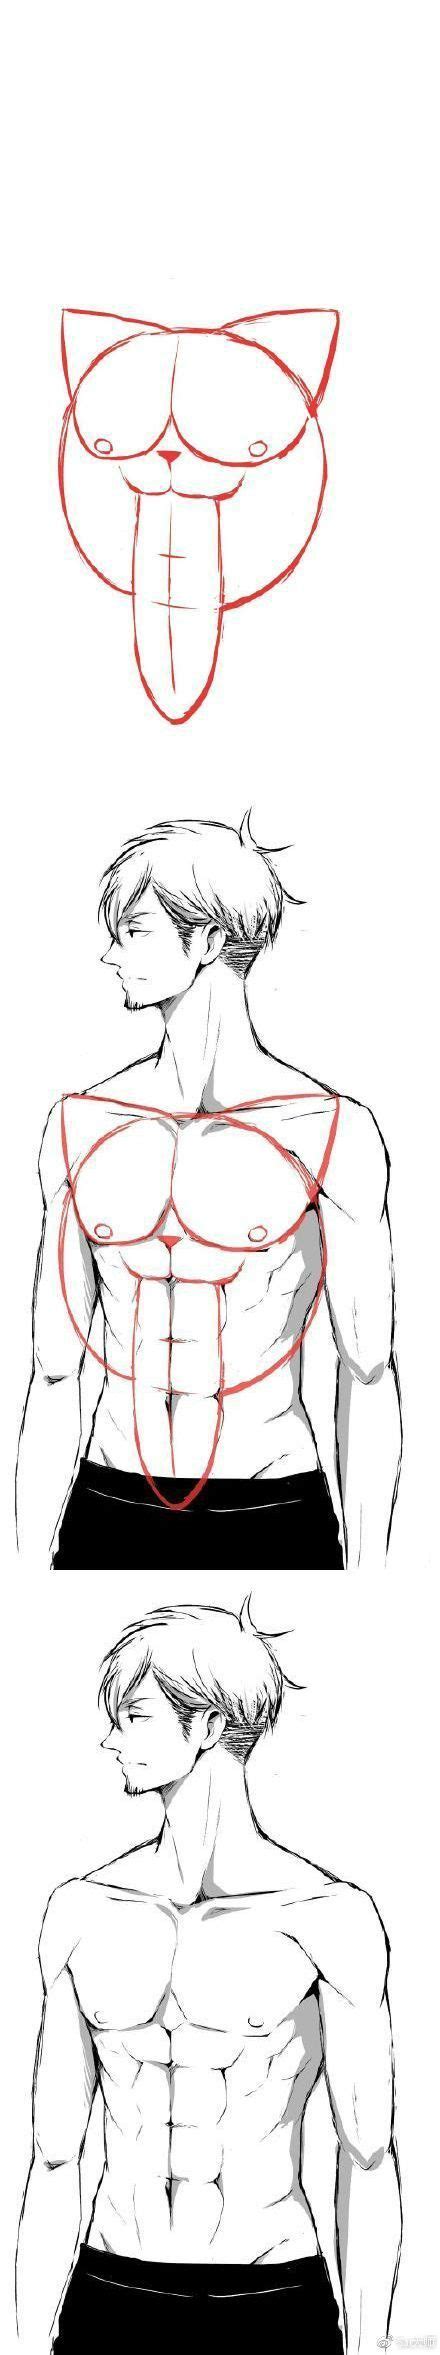 Esboço Masculino How To Draw Abs Art Reference Poses Drawing Tutorial